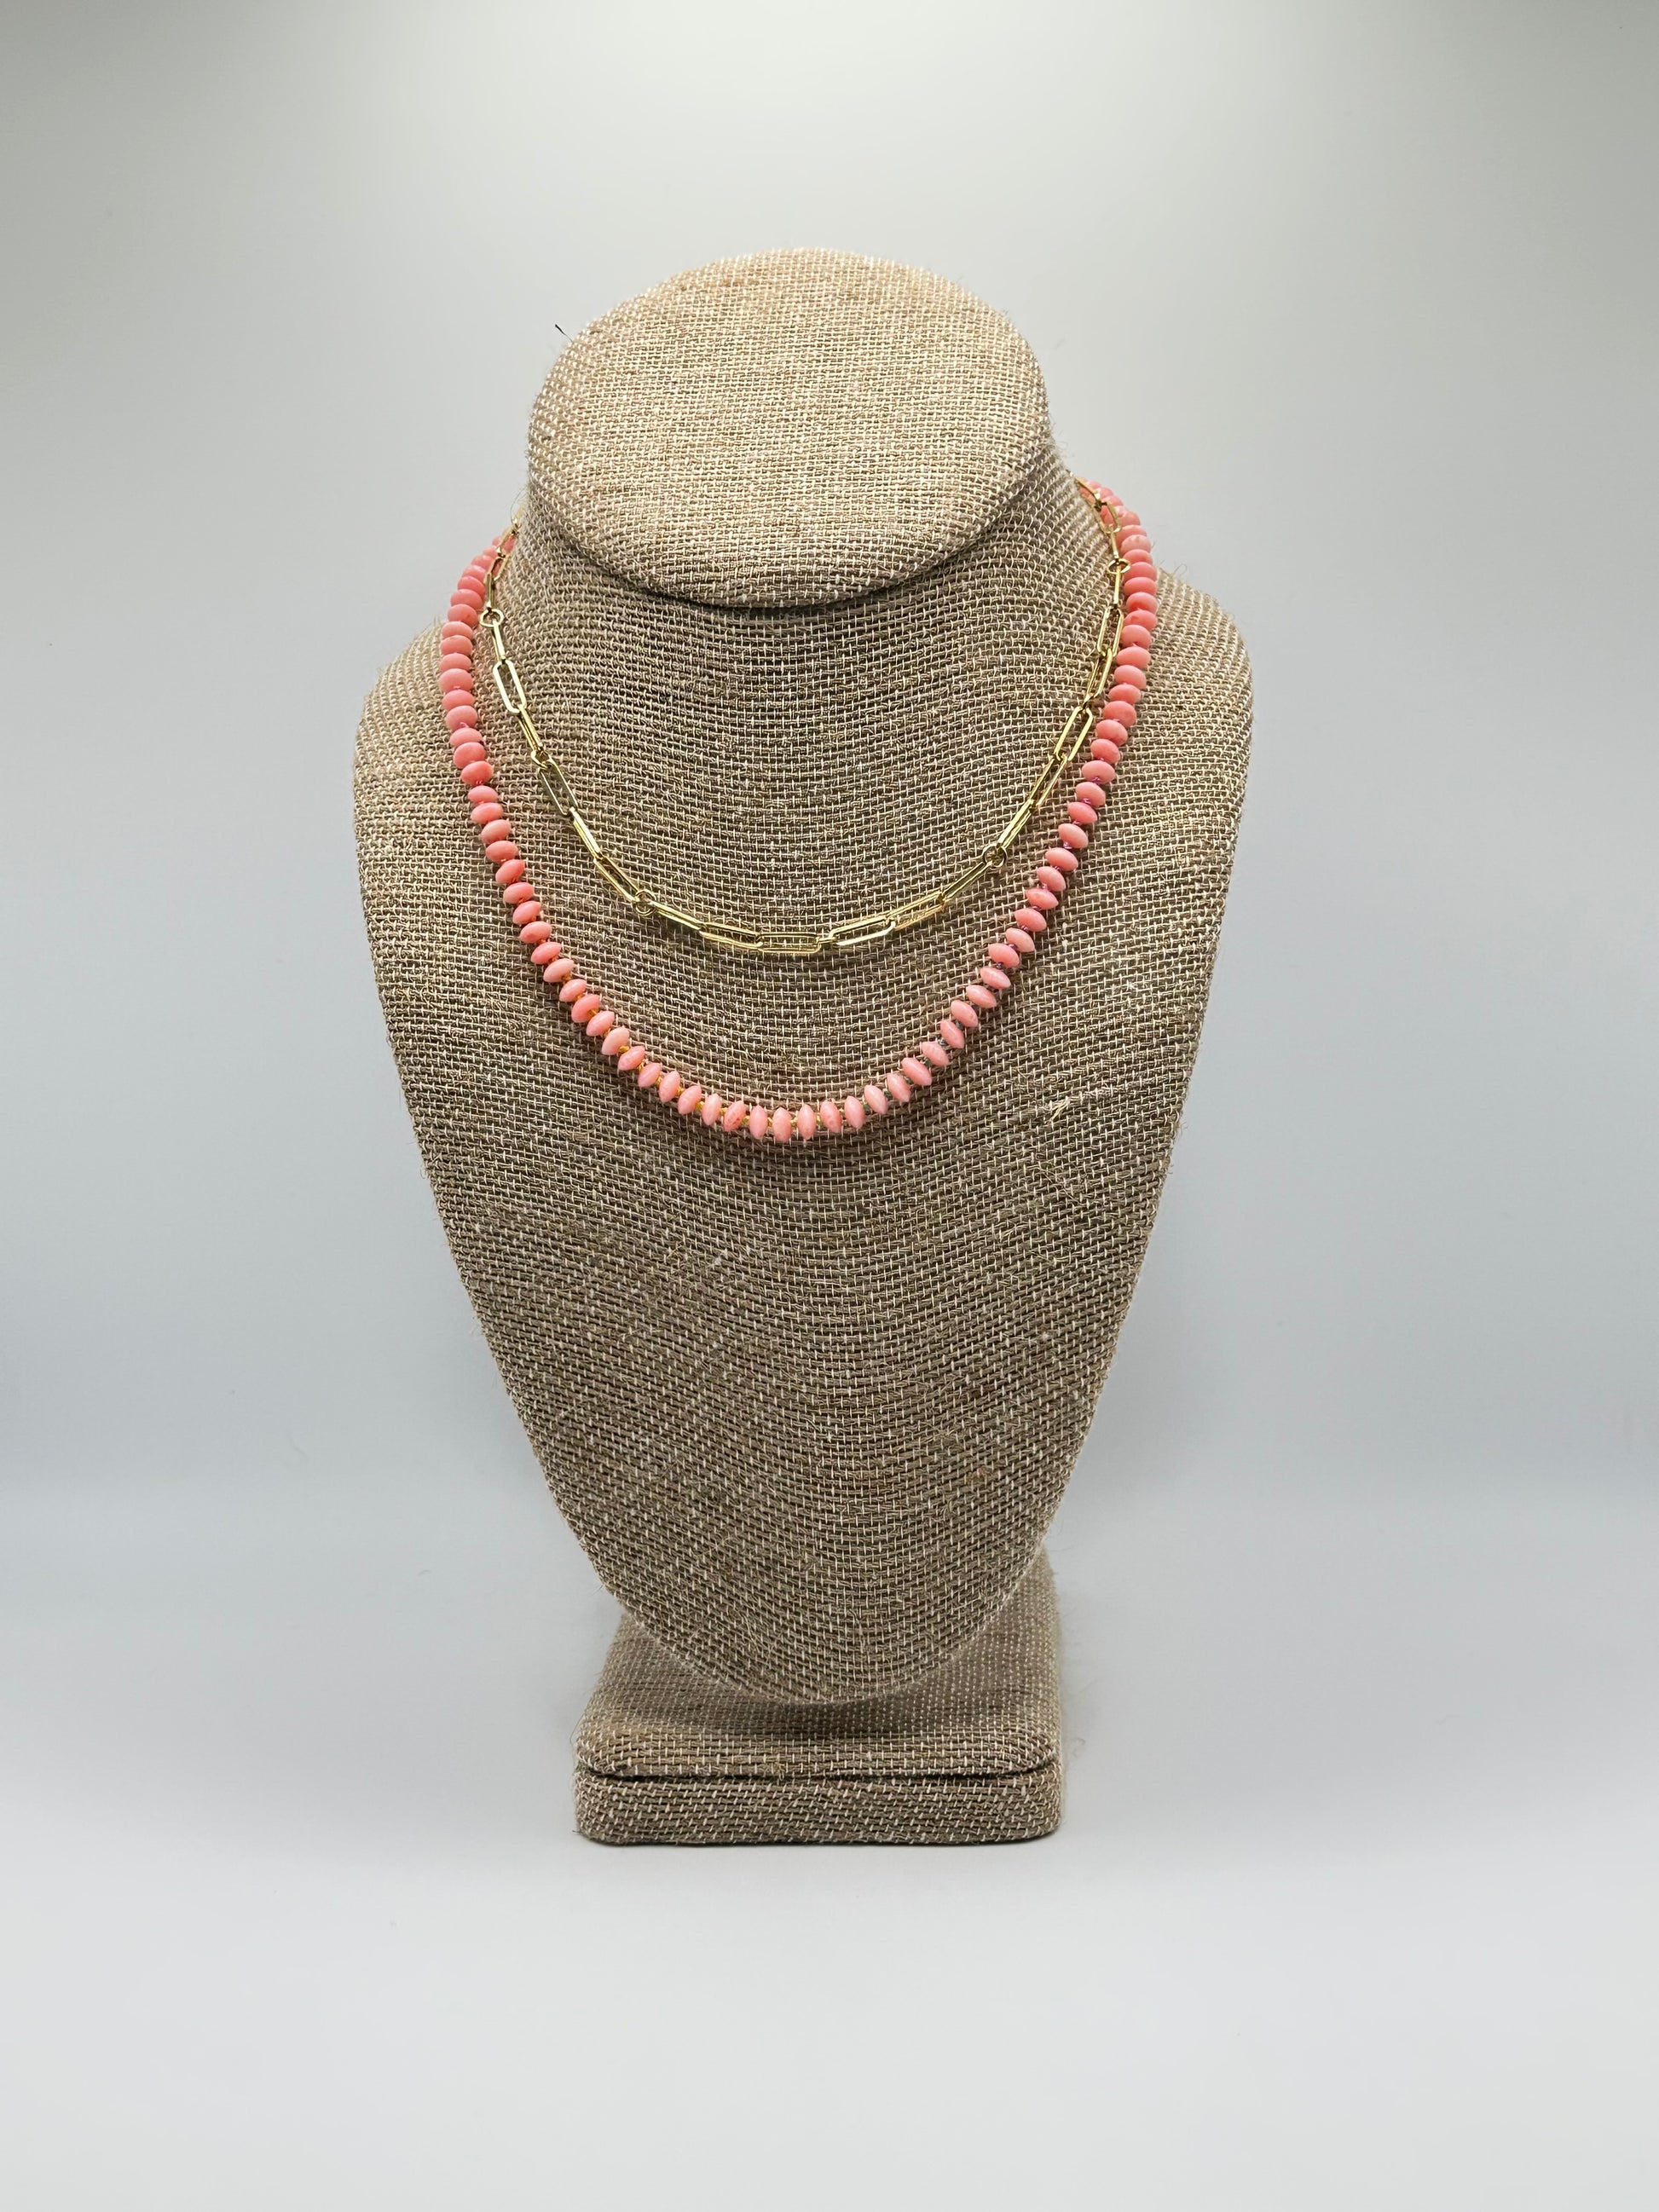 Bamboo Coral Rainbow Bead Necklace